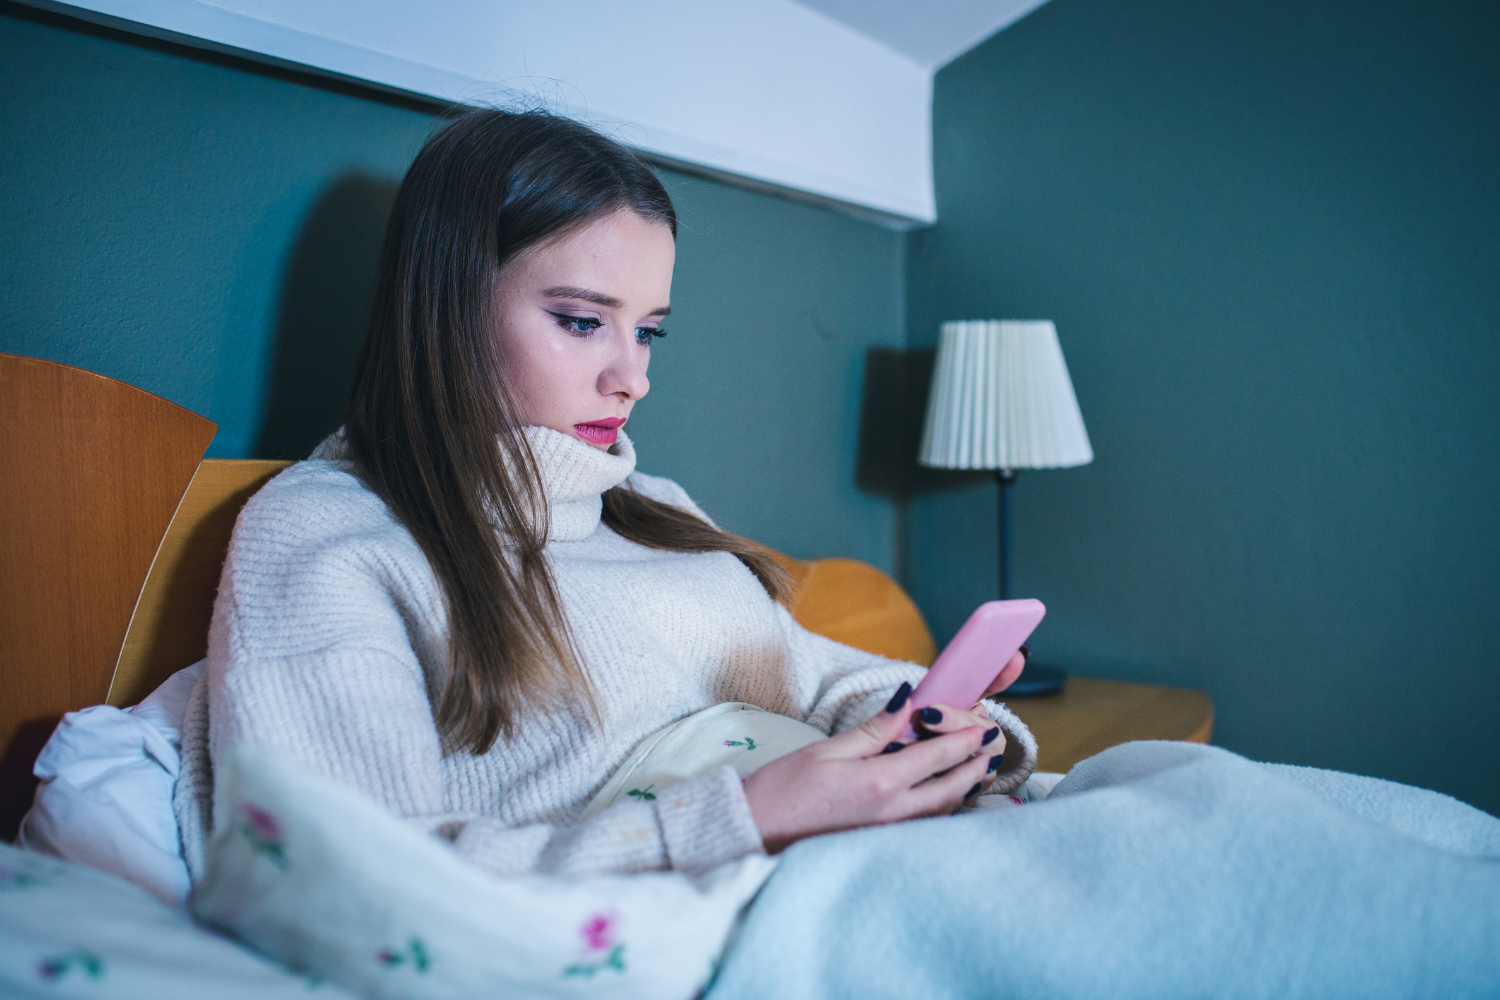 Teenager sat in bed looking at a pink smartphone